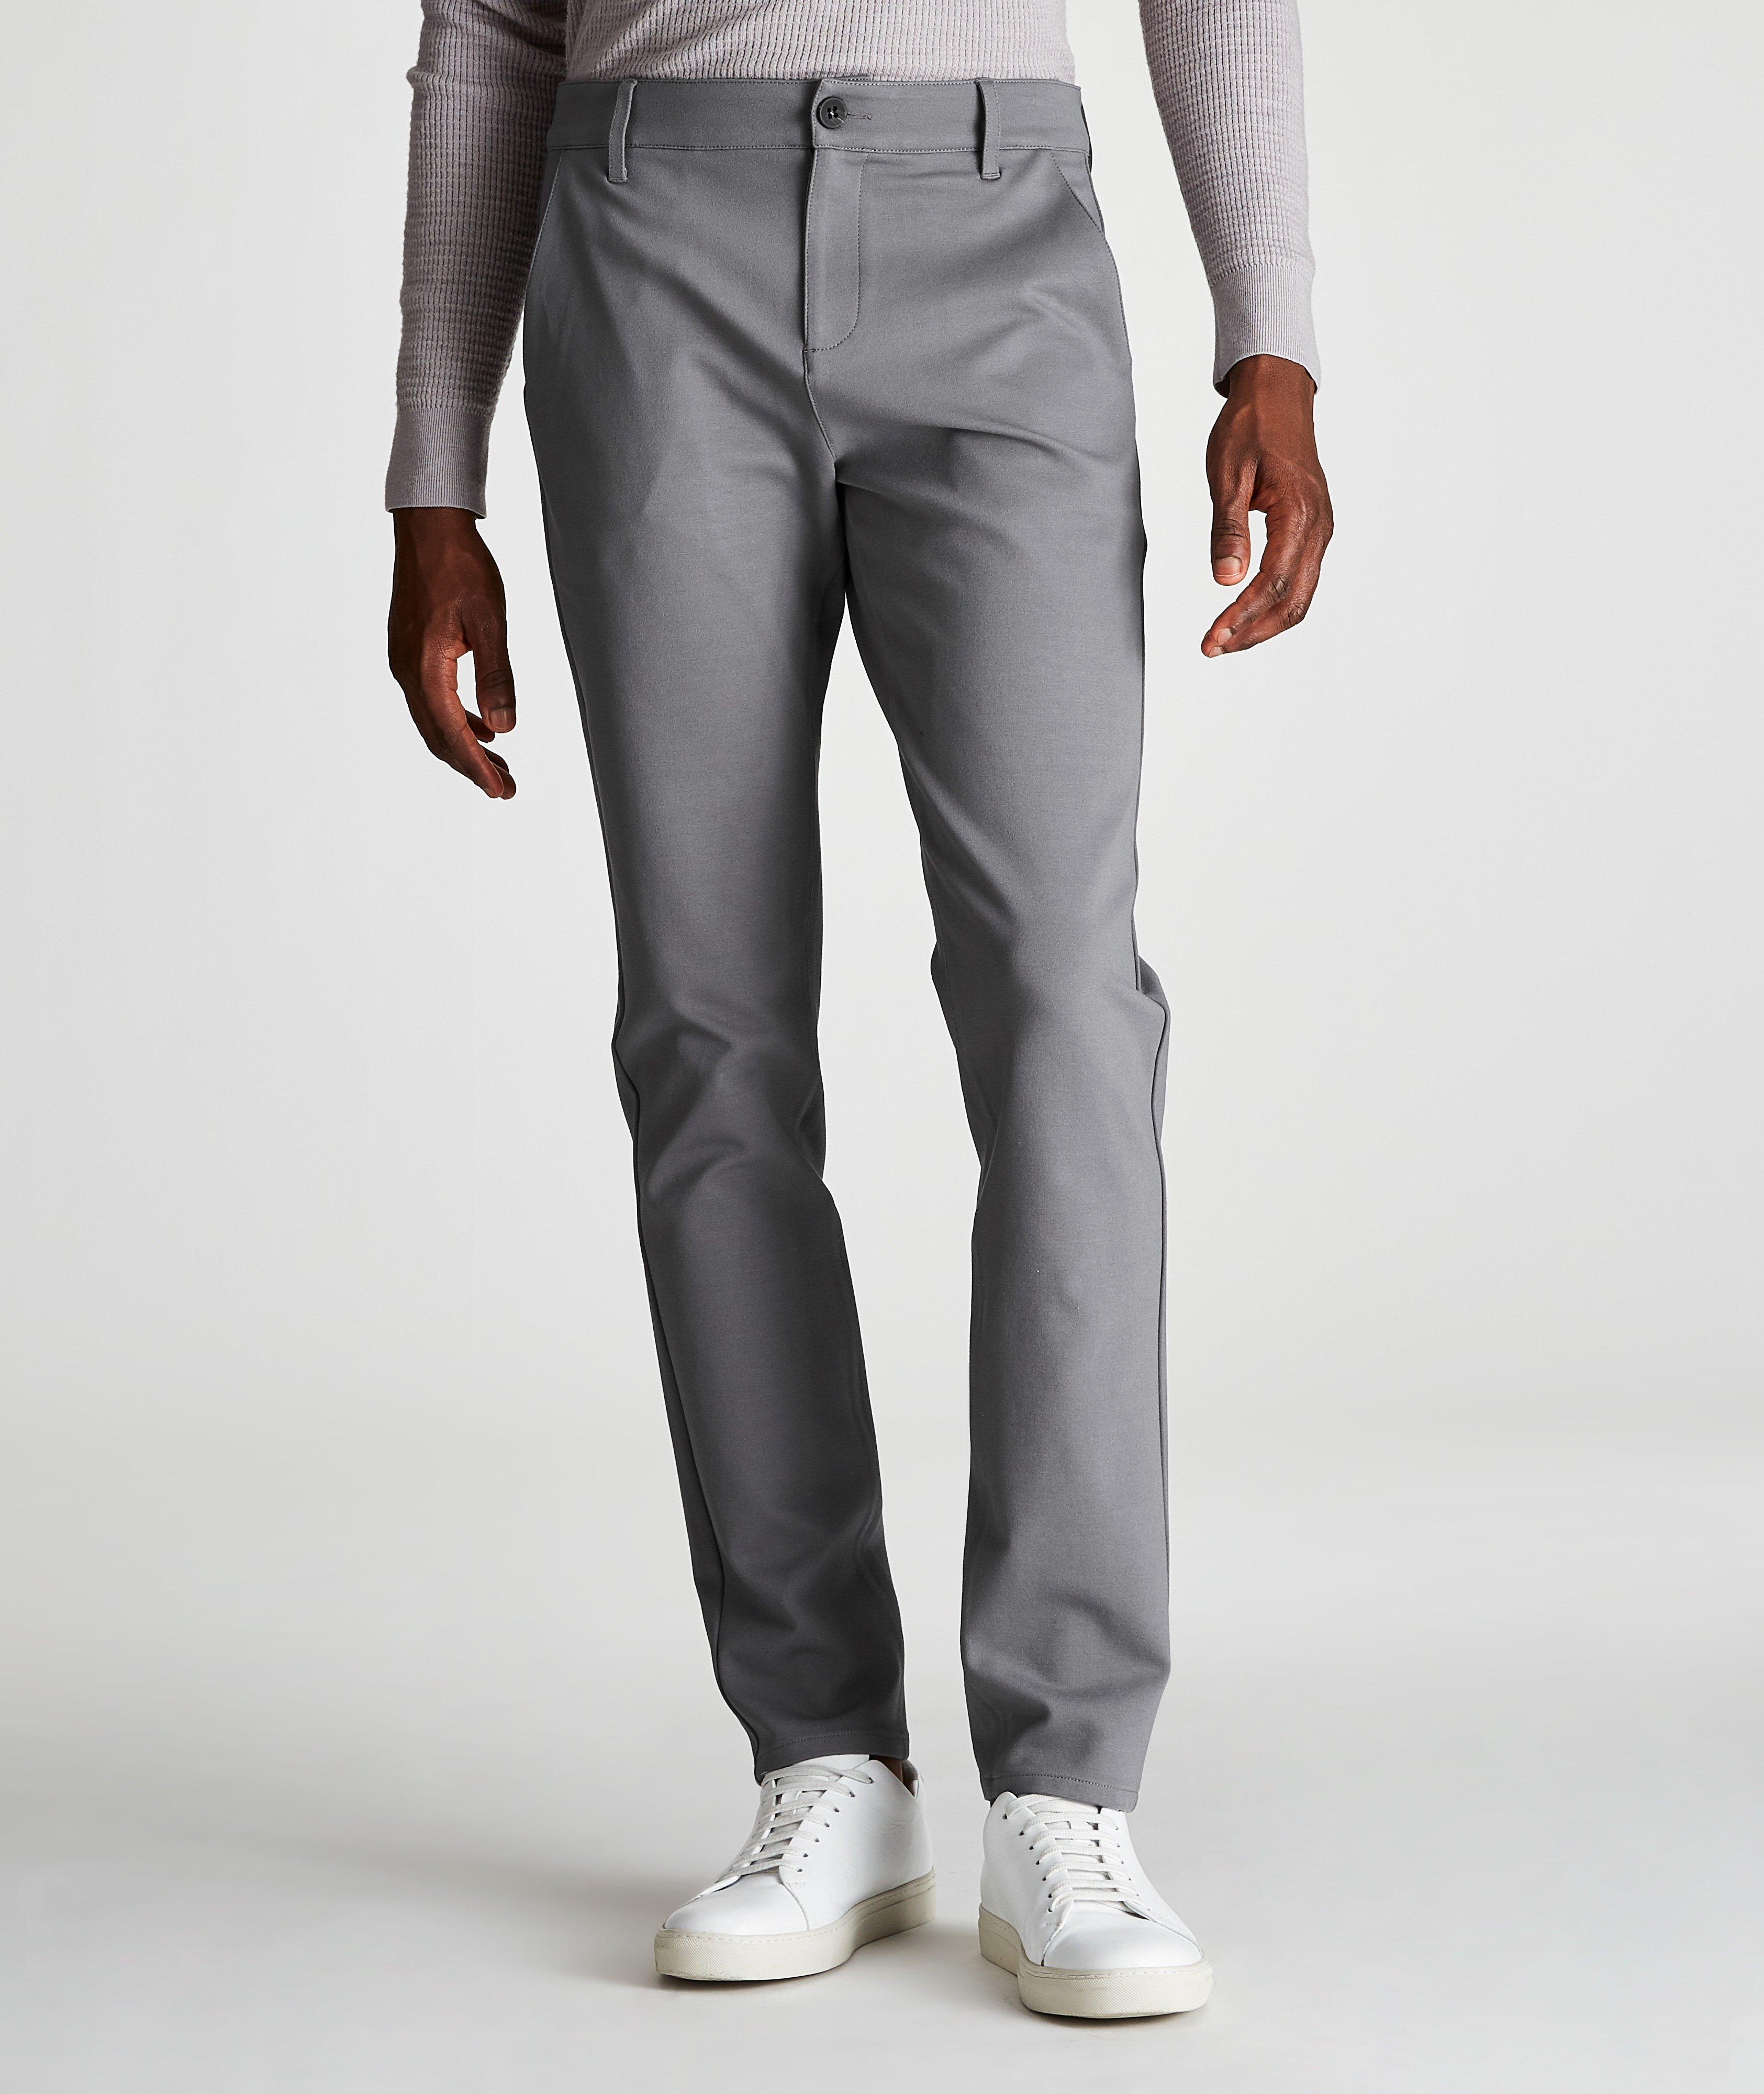 Stafford Transcend-Knit Trousers image 0